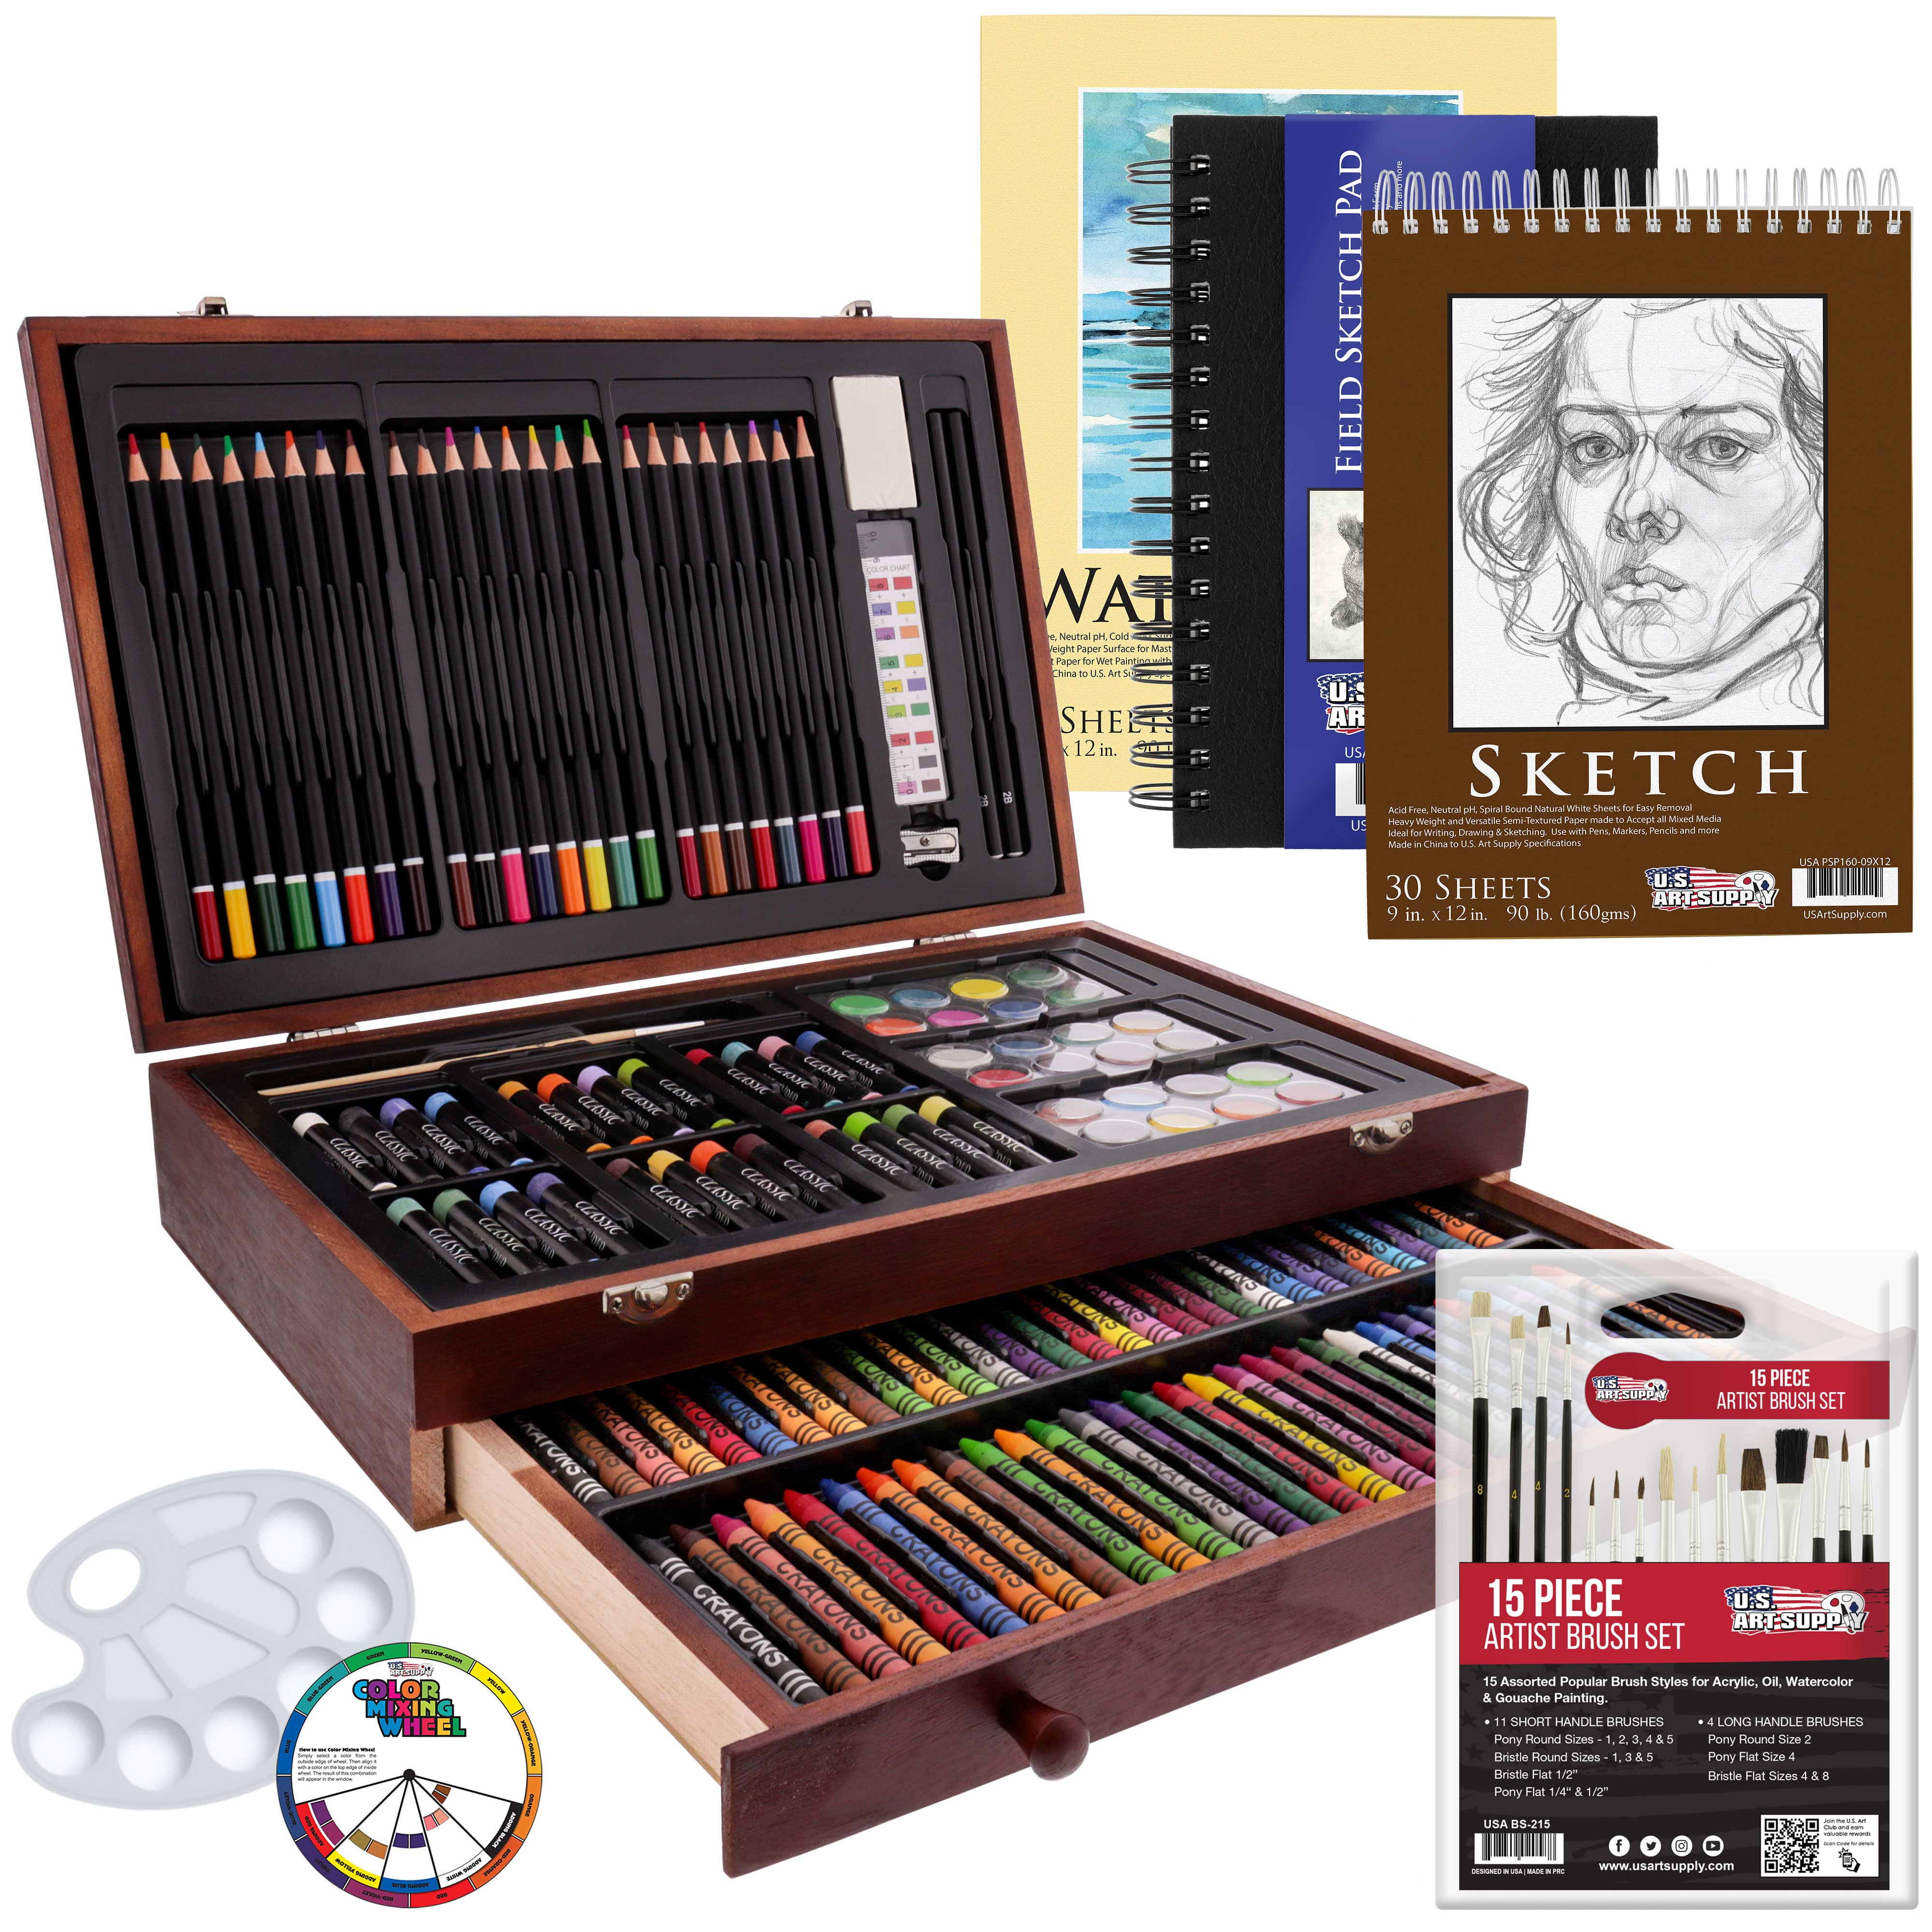  175 Piece Deluxe Art Set with 2 Drawing Pads, Acrylic  Paints,Crayons,Colored Pencils,Paint Set in Wooden Case,Professional Art Kit ,Art Supplies for Adults,Teens and Artist,Paint Supplies